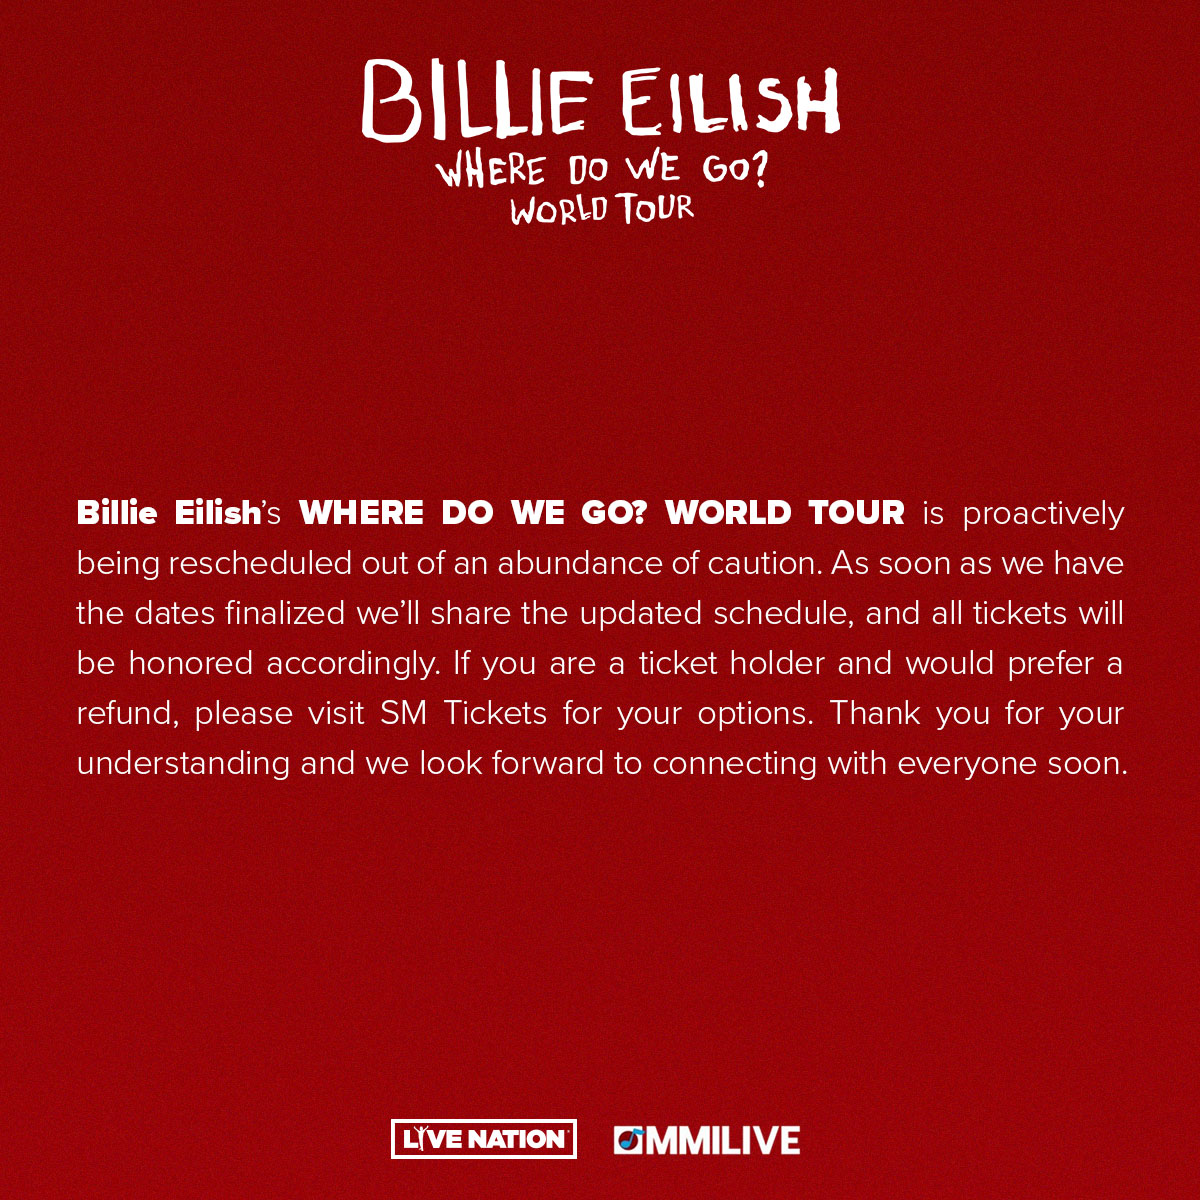 🟢#BillieEilishMNL Update🟢 WHERE DO WE GO? WORLD TOUR is proactively being rescheduled out of an abundance of caution. Dates will be shared as soon as finalized & all tickets will be honored accordingly. Ticket holders who would prefer a refund can visit bit.ly/BERefund